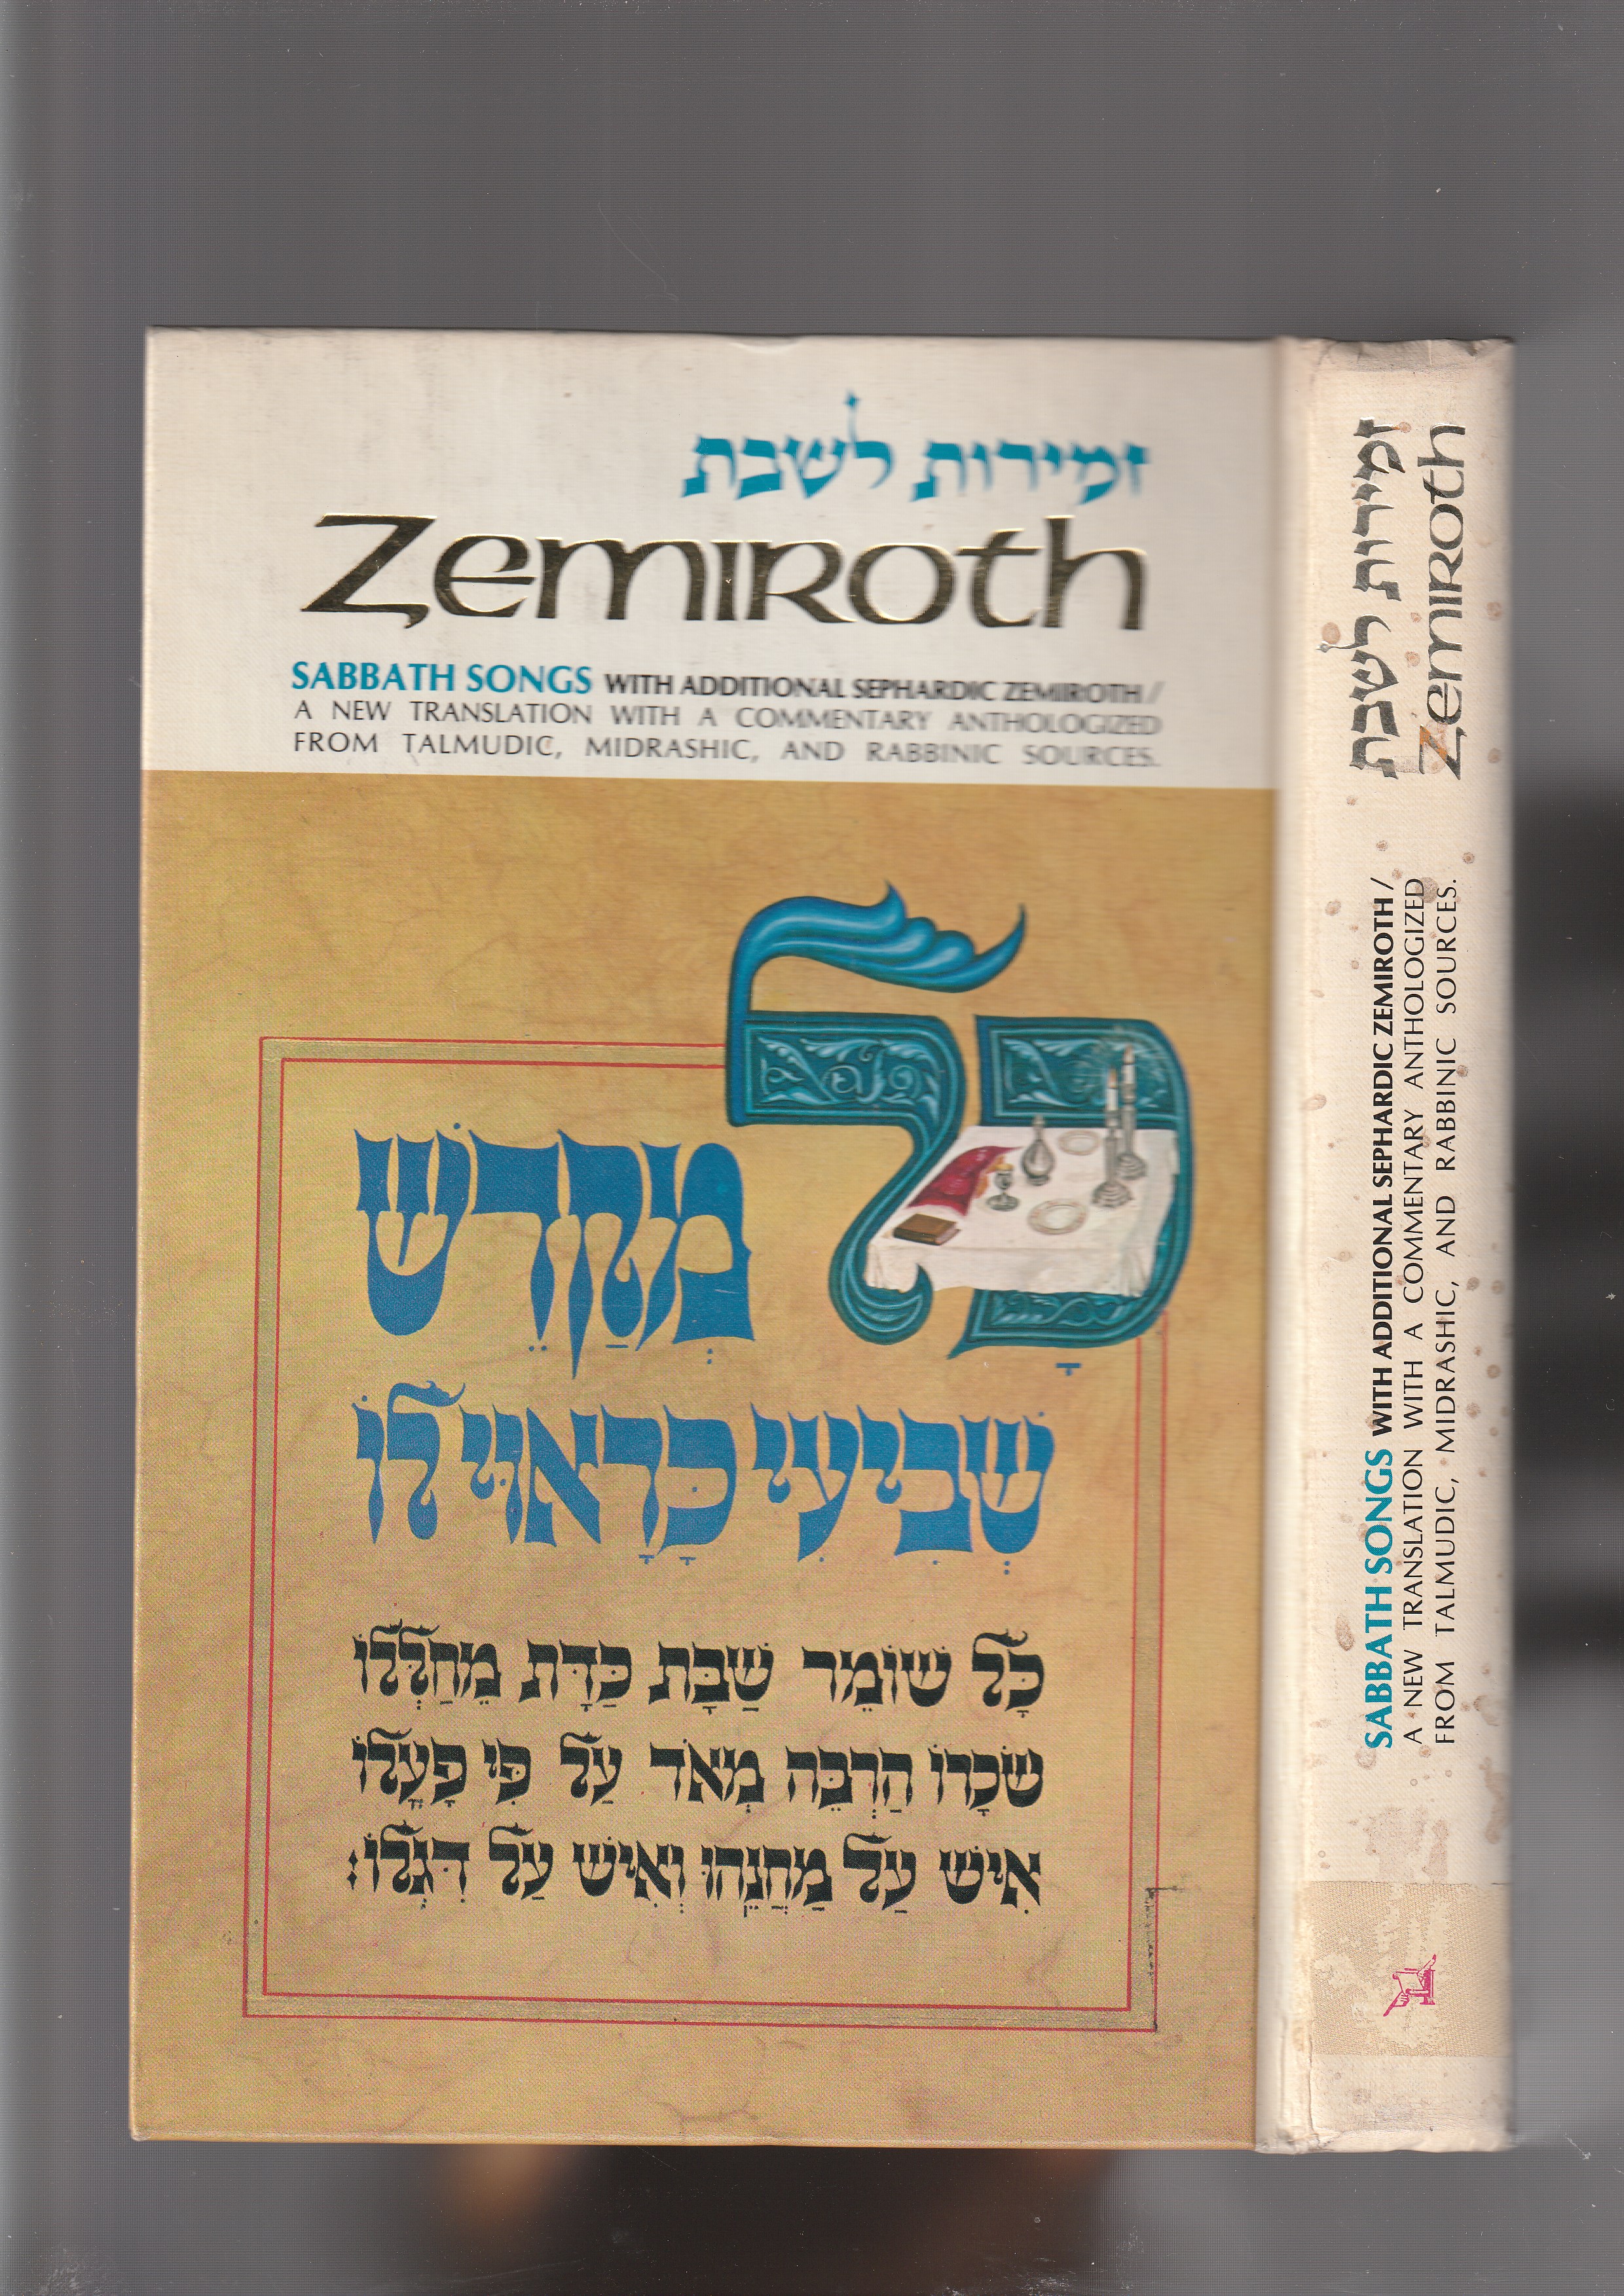 ZEMIROTH Sabbath Songs with additional sephardic zemiroth : A New Translation With Commentary, Anthologized from Talmudic, Midrashic and Rabbinic Sources (English and Hebrew Edition) - Scherman, Rabbi Nosson, translation, commentary and An Overview: Sabbath and Zemiroth